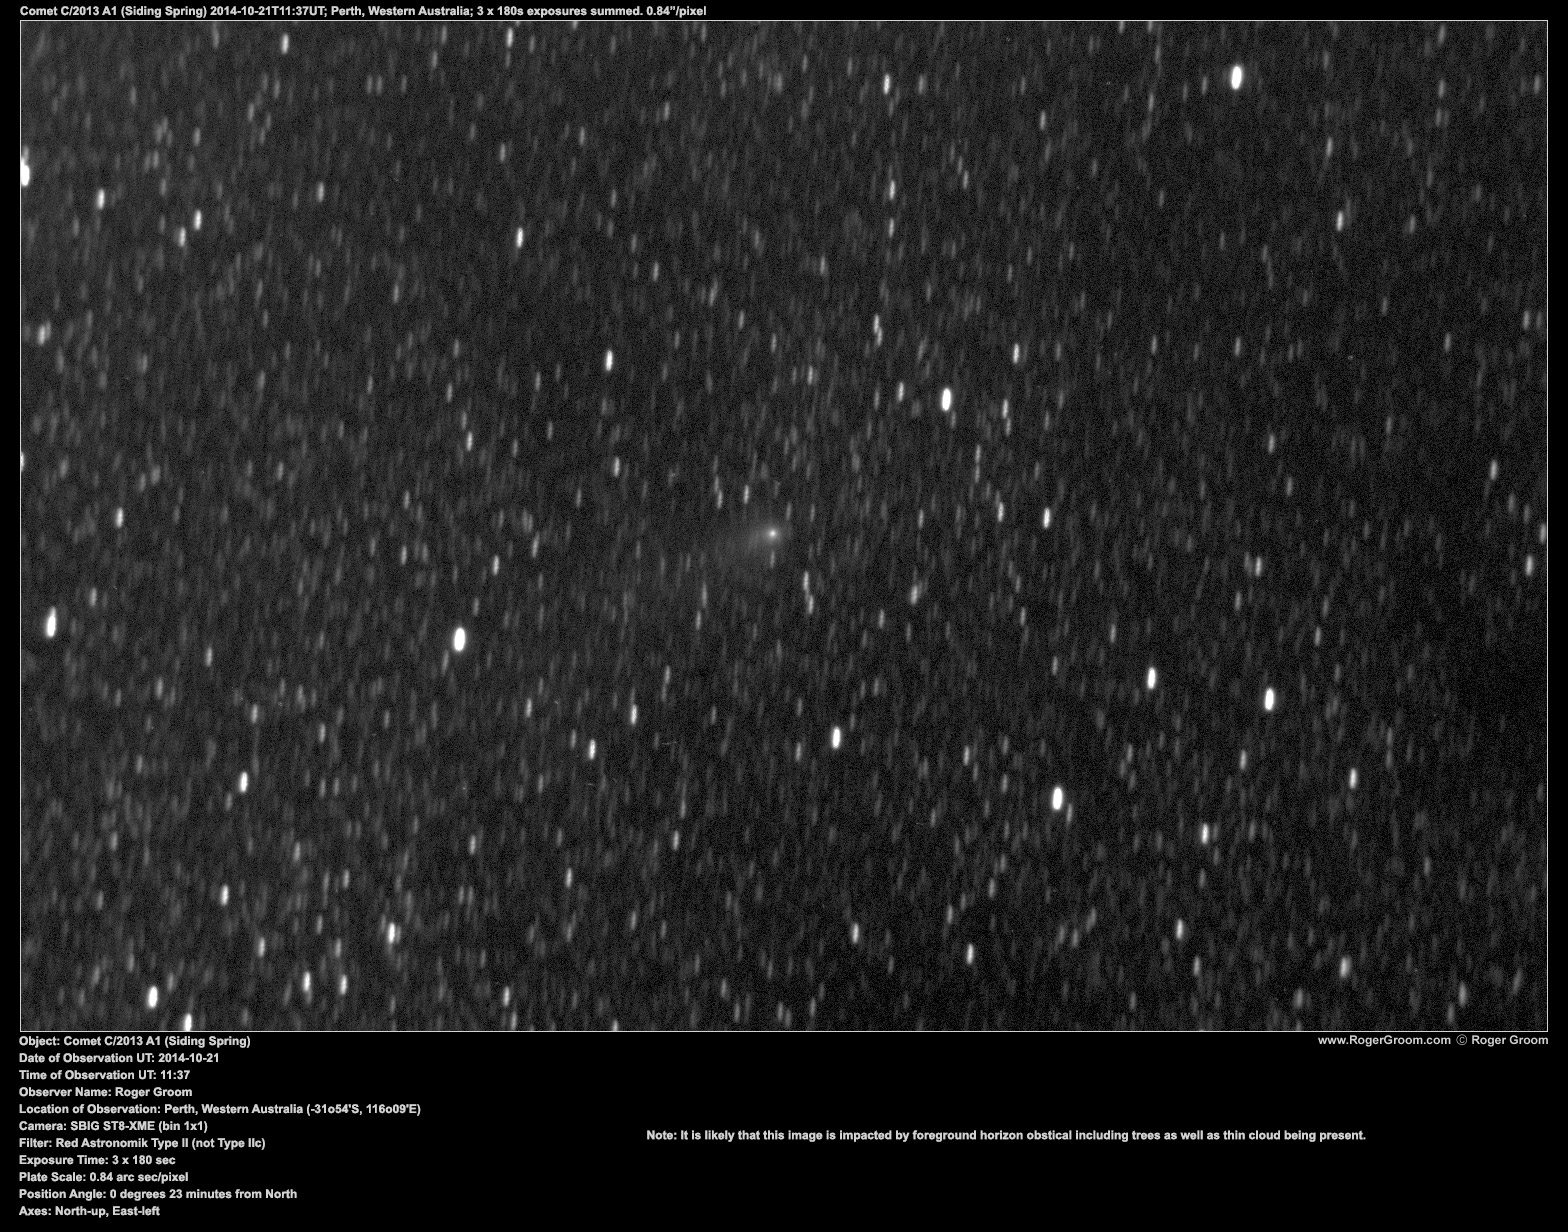 Object: Comet C/2013 A1 (Siding Spring) Date of Observation UT: 2014-10-21 Time of Observation UT: 11:37 Observer Name: Roger Groom Location of Observation: Perth, Western Australia (-31o54'S, 116o09'E) Camera: SBIG ST8-XME (bin 1x1) Filter: Red Astronomik Type II (not Type IIc) Exposure Time: 3 x 180 sec Plate Scale: 0.84 arc sec/pixel Position Angle: 0 degrees 23 minutes from North Axes: North-up, East-left Likely impacted by thin cloud and trees to some degree.